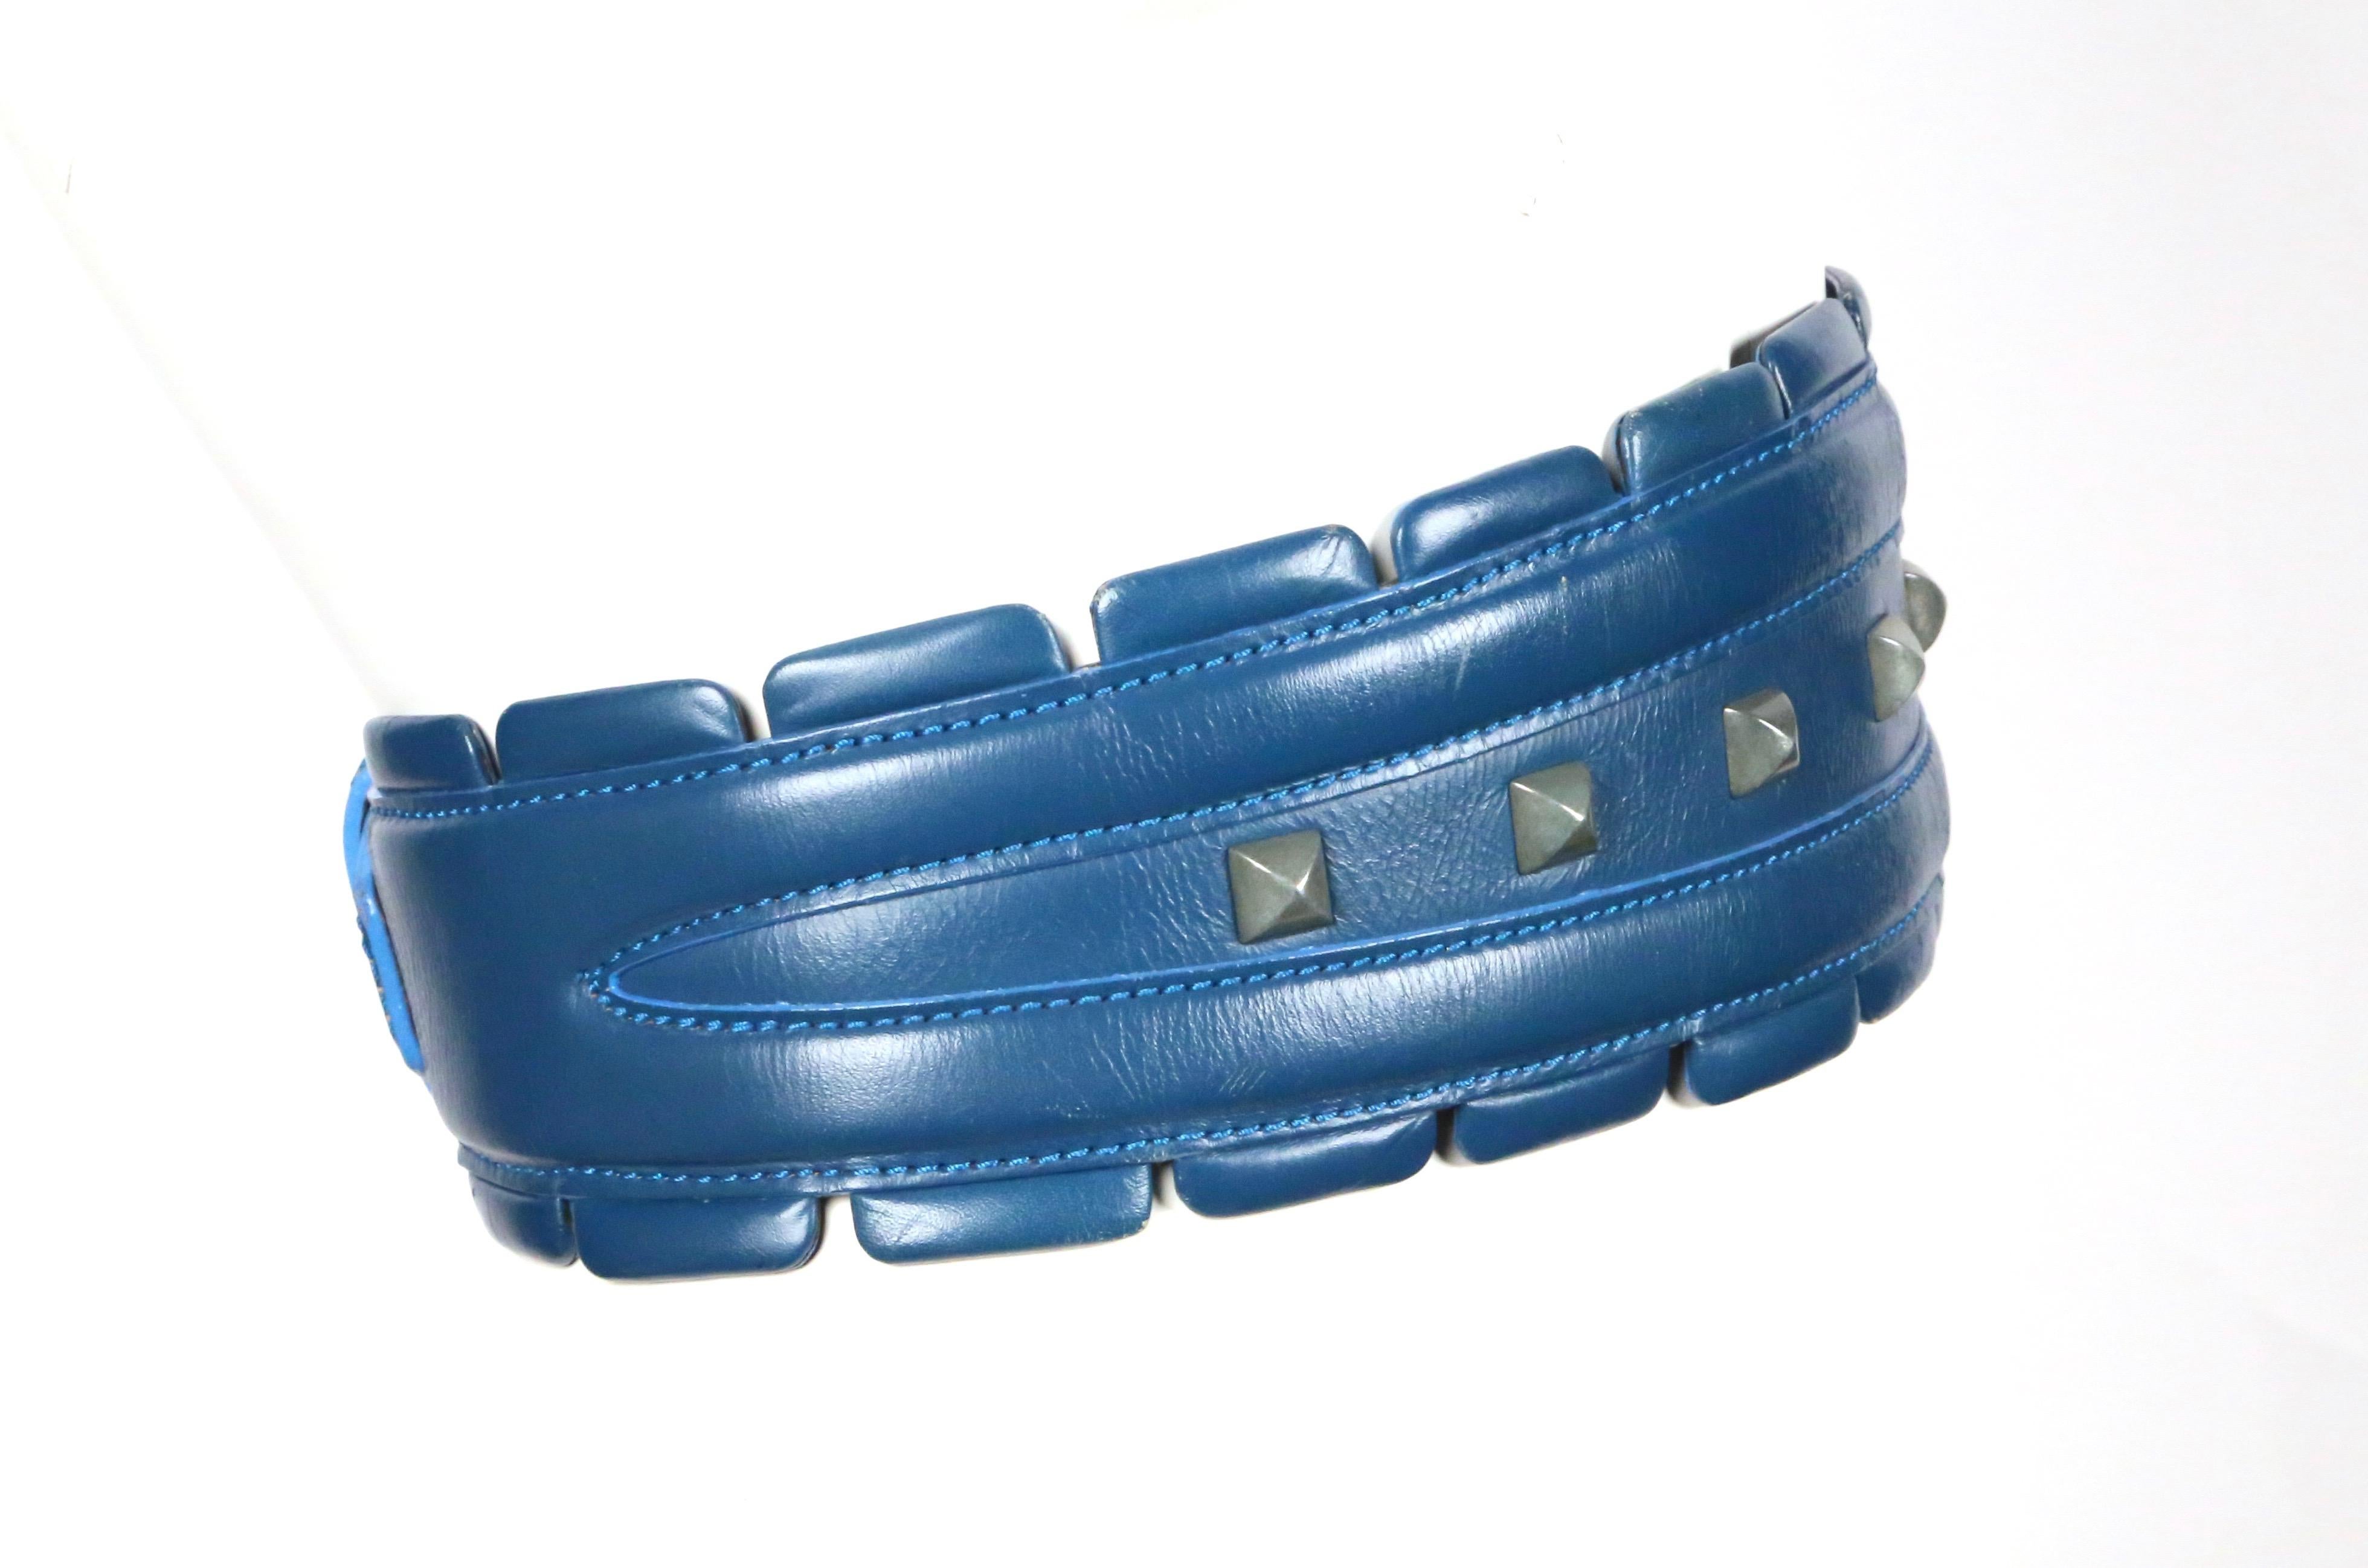 Very rare, blue-green leather belt with gunmetal pyramid studs from Azzedine Alaia as seen on the fall 1988 runway. Belt is labeled a French 65 and ideally fits a 23-24.5